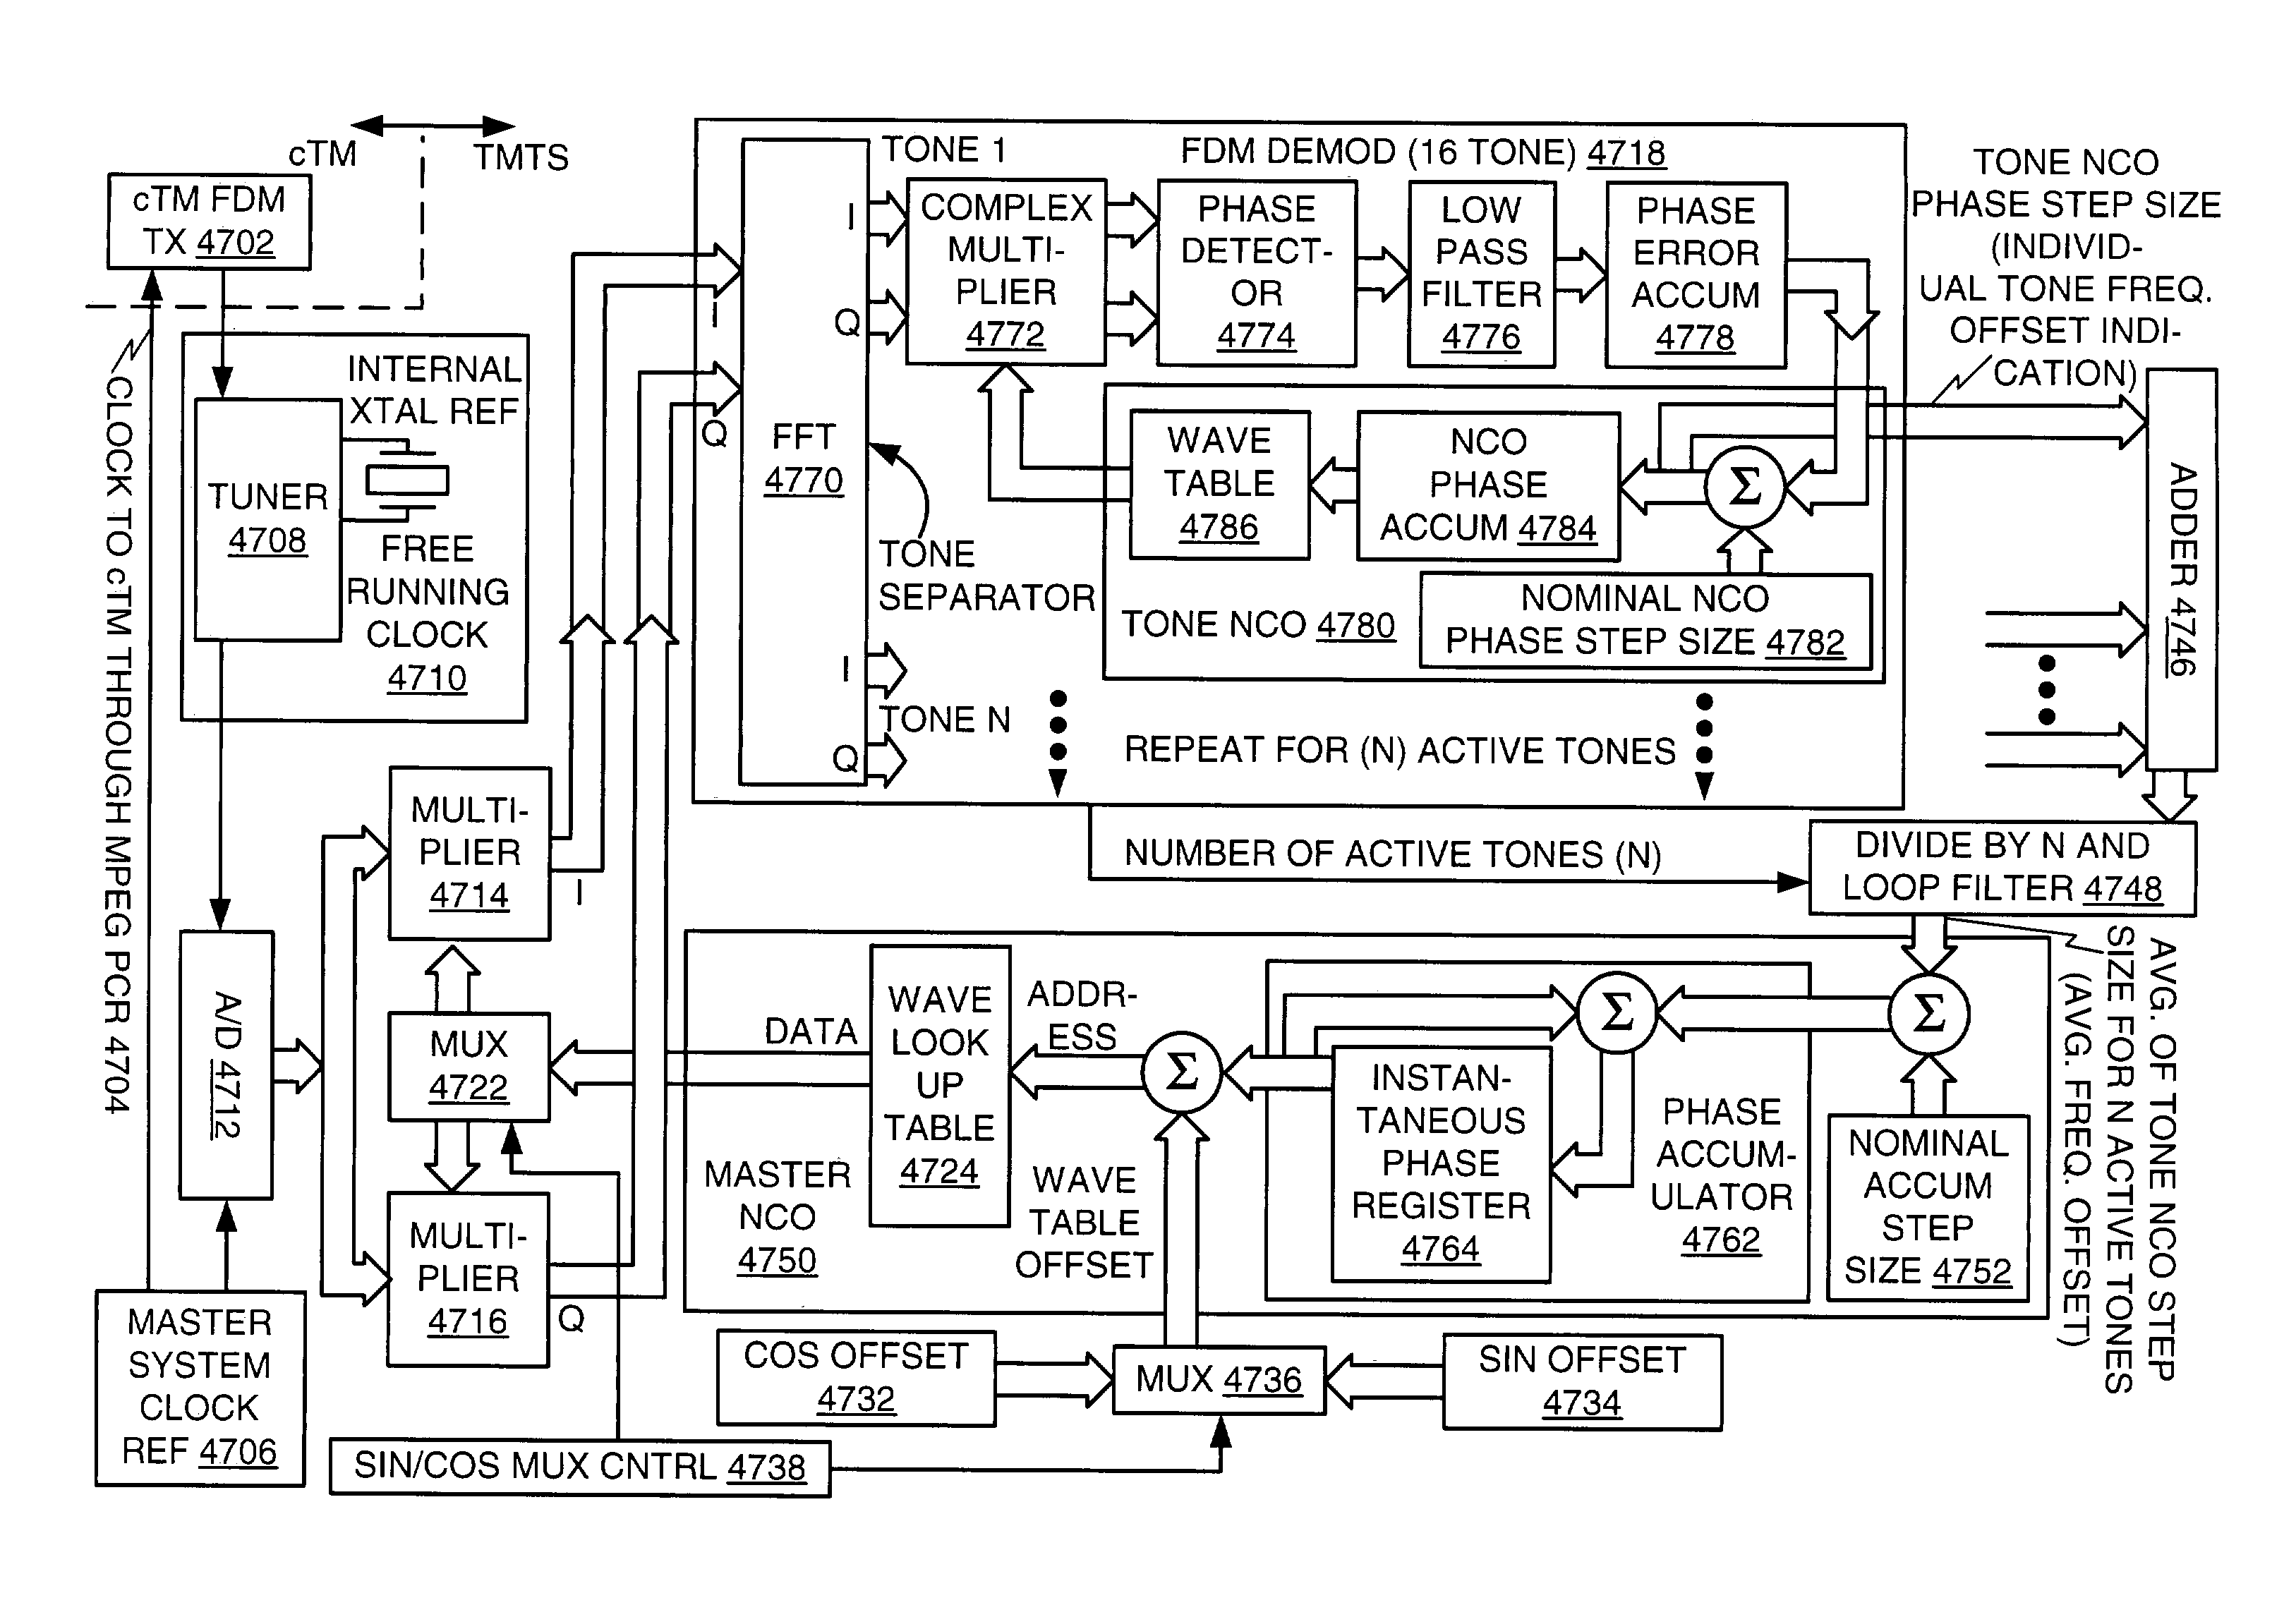 Automatic frequency control of multiple channels